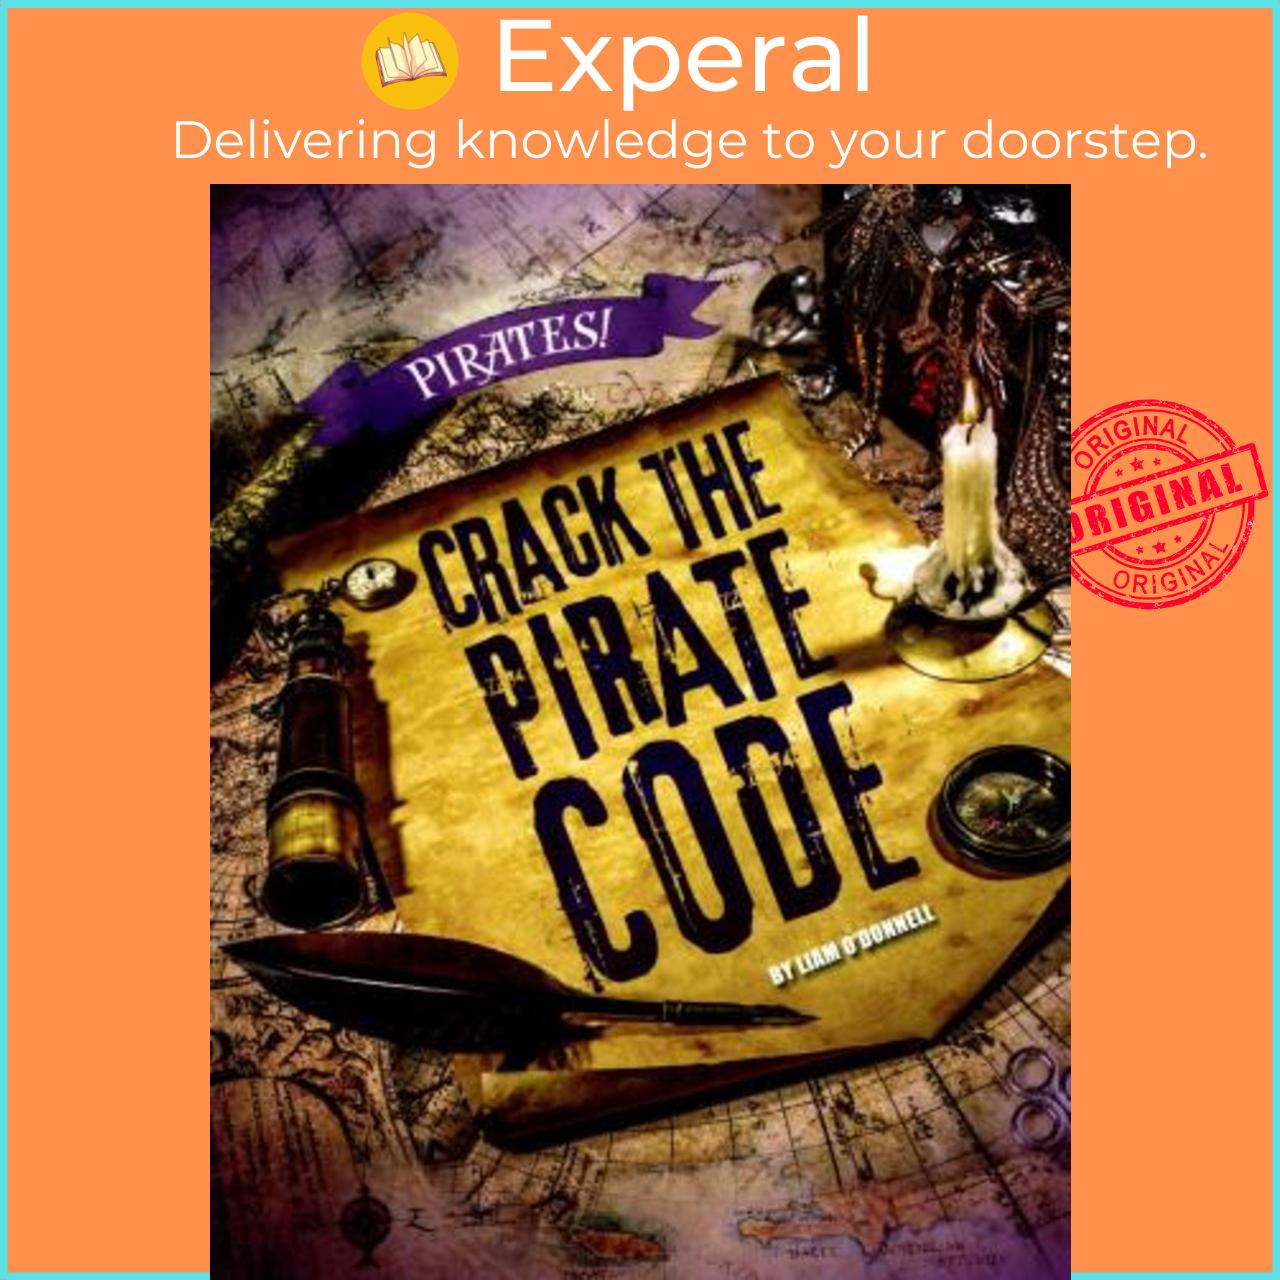 Sách - Crack the Pirate Code by Liam O'Donnell (US edition, hardcover)